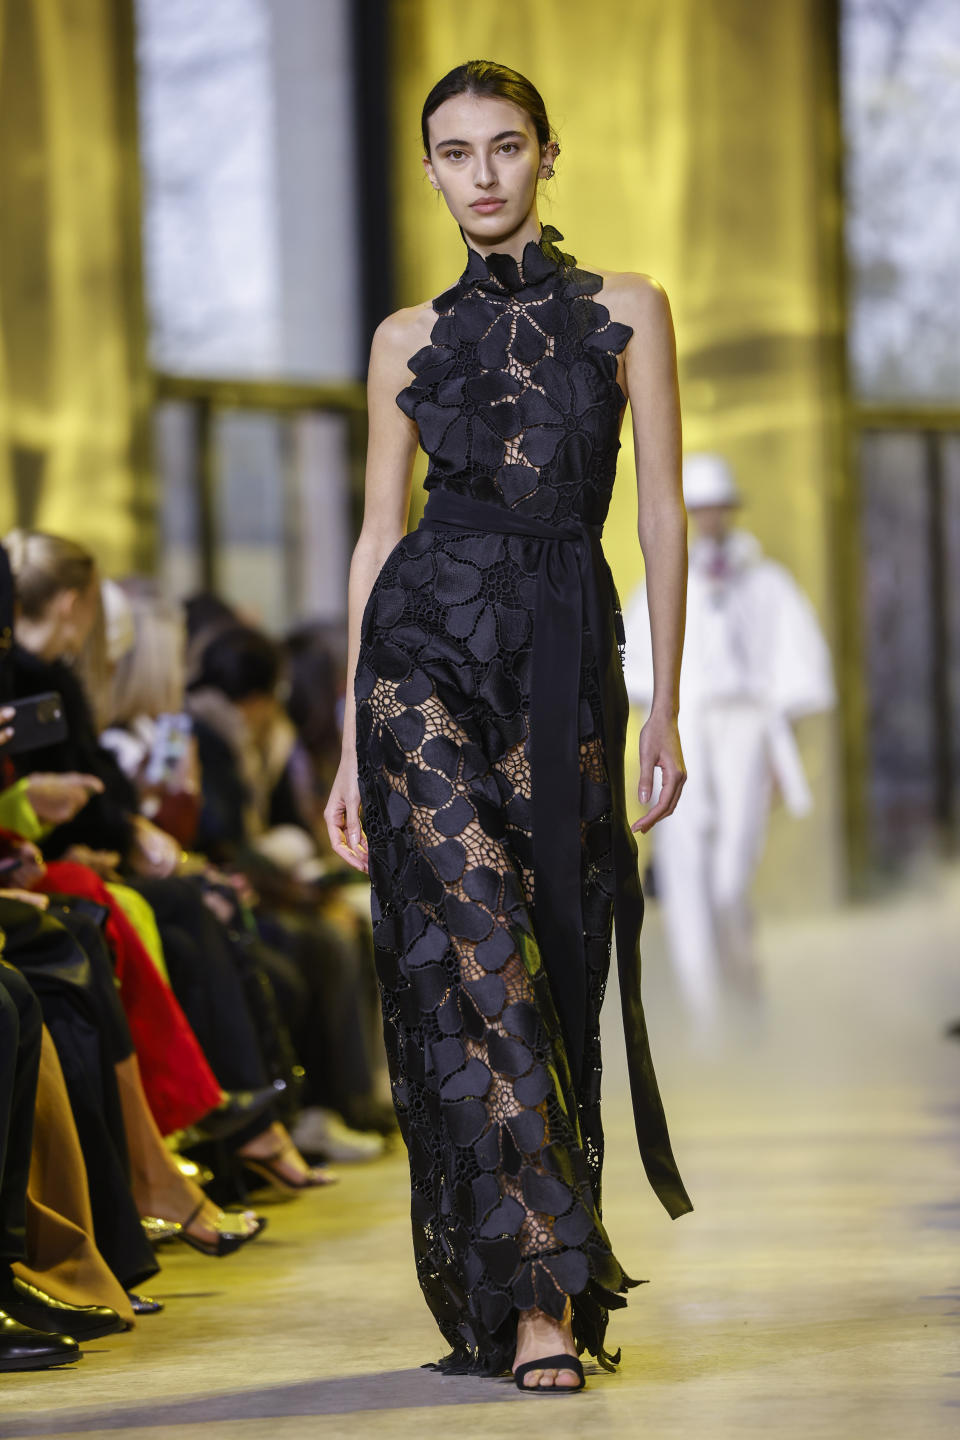 A model wears a creation as part of the Elie Saab Fall/Winter 2023-2024 ready-to-wear collection presented Saturday, March 4, 2023 in Paris. (Vianney Le Caer/Invision/AP)